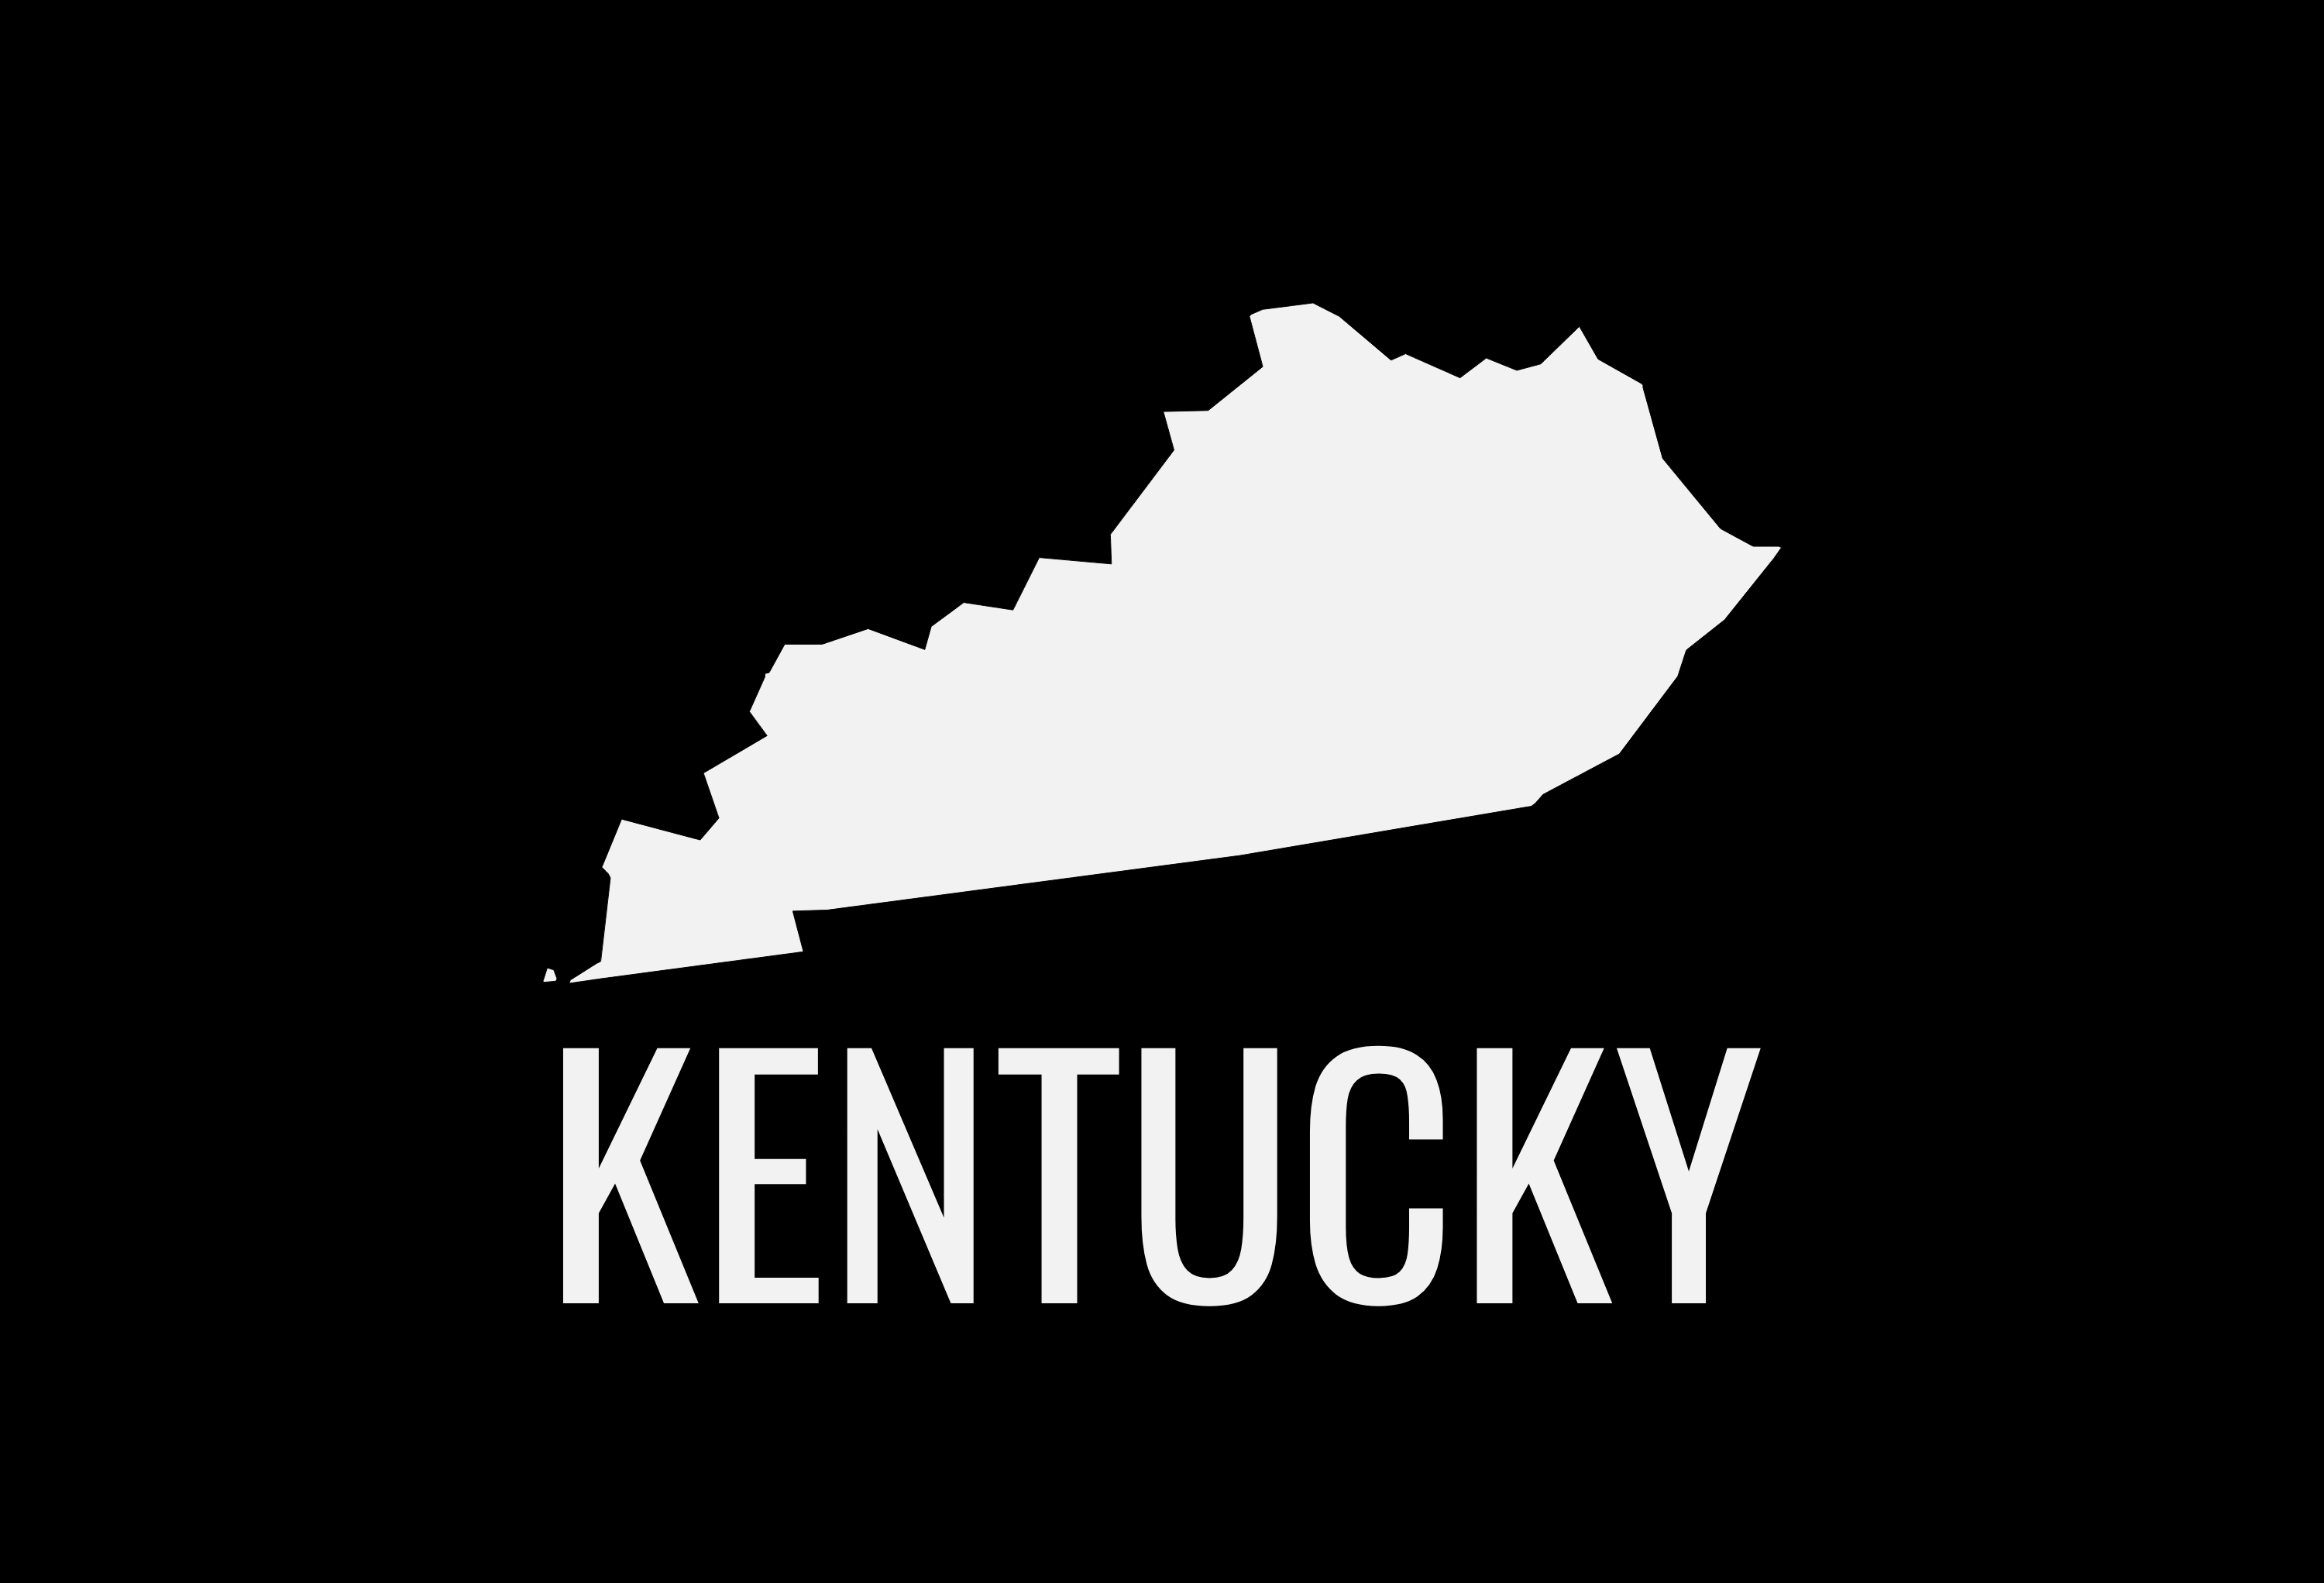 Kentucky State Map Car Decal - Permanent Vinyl Sticker for Cars, Vehicle, Doors, Windows, Laptop, and more!